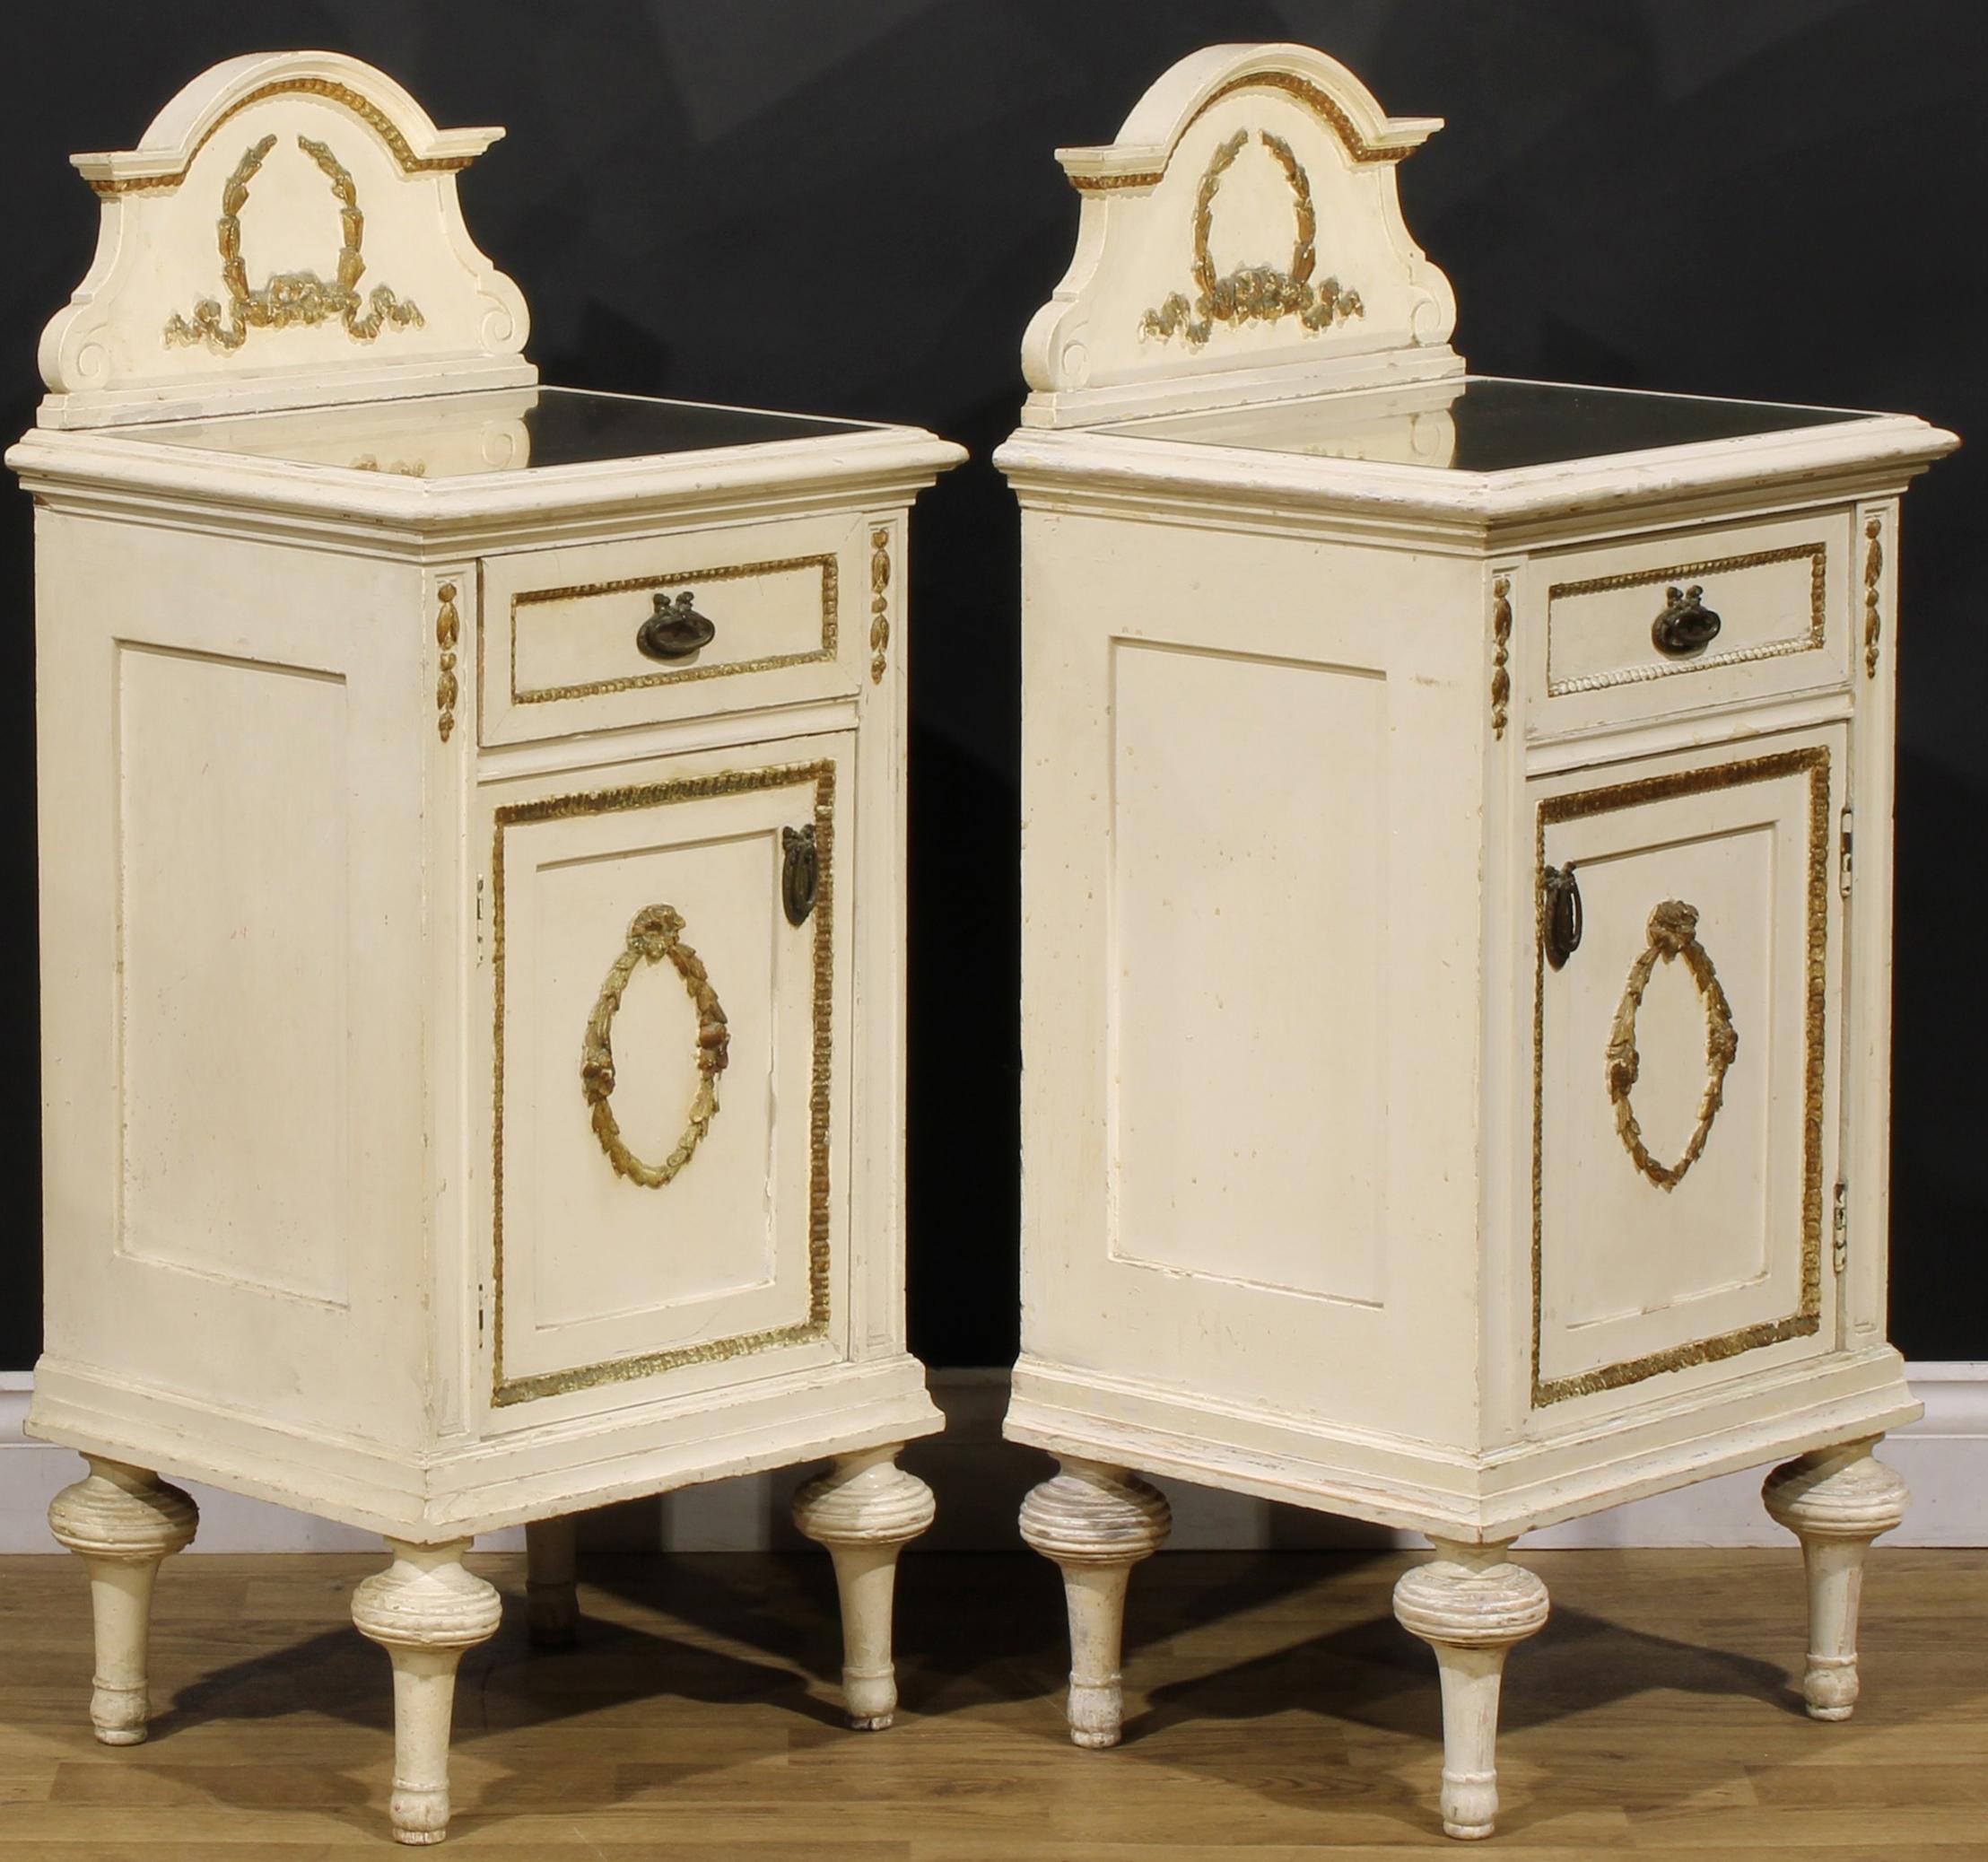 Glass Pair of 19th Century French Louis XVI Carved Painted Nightstands Bedside Tables For Sale